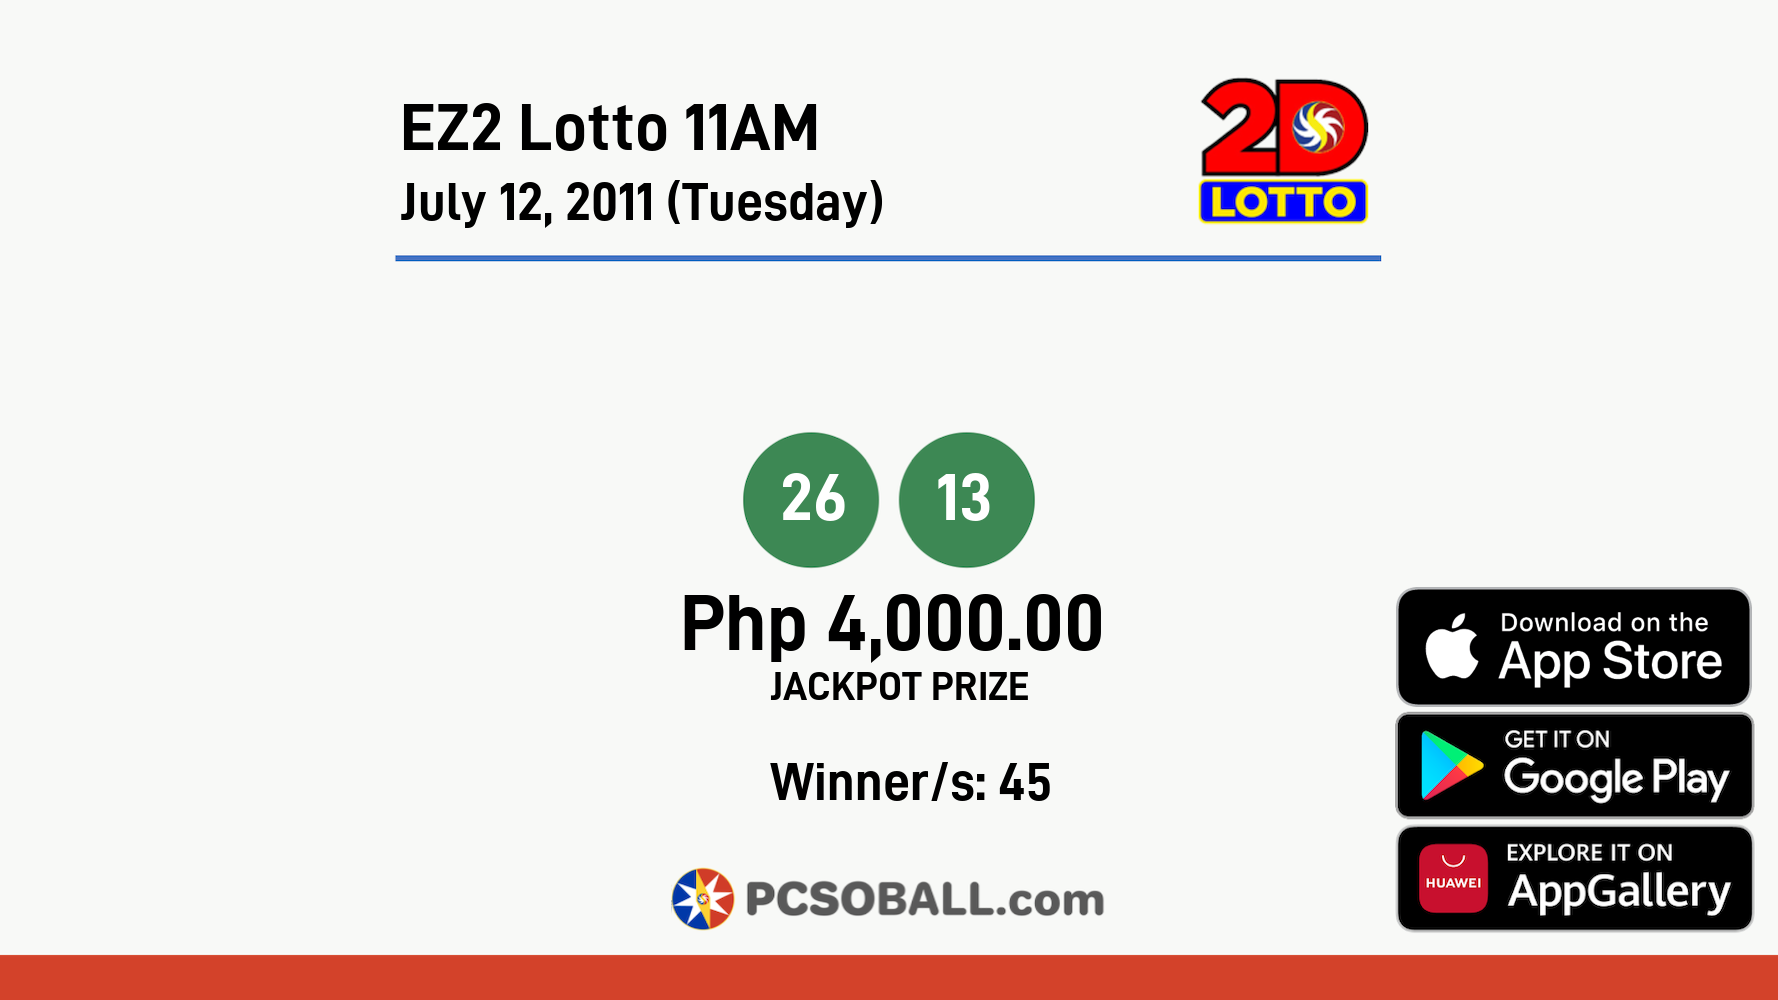 EZ2 Lotto 11AM July 12, 2011 (Tuesday) Result